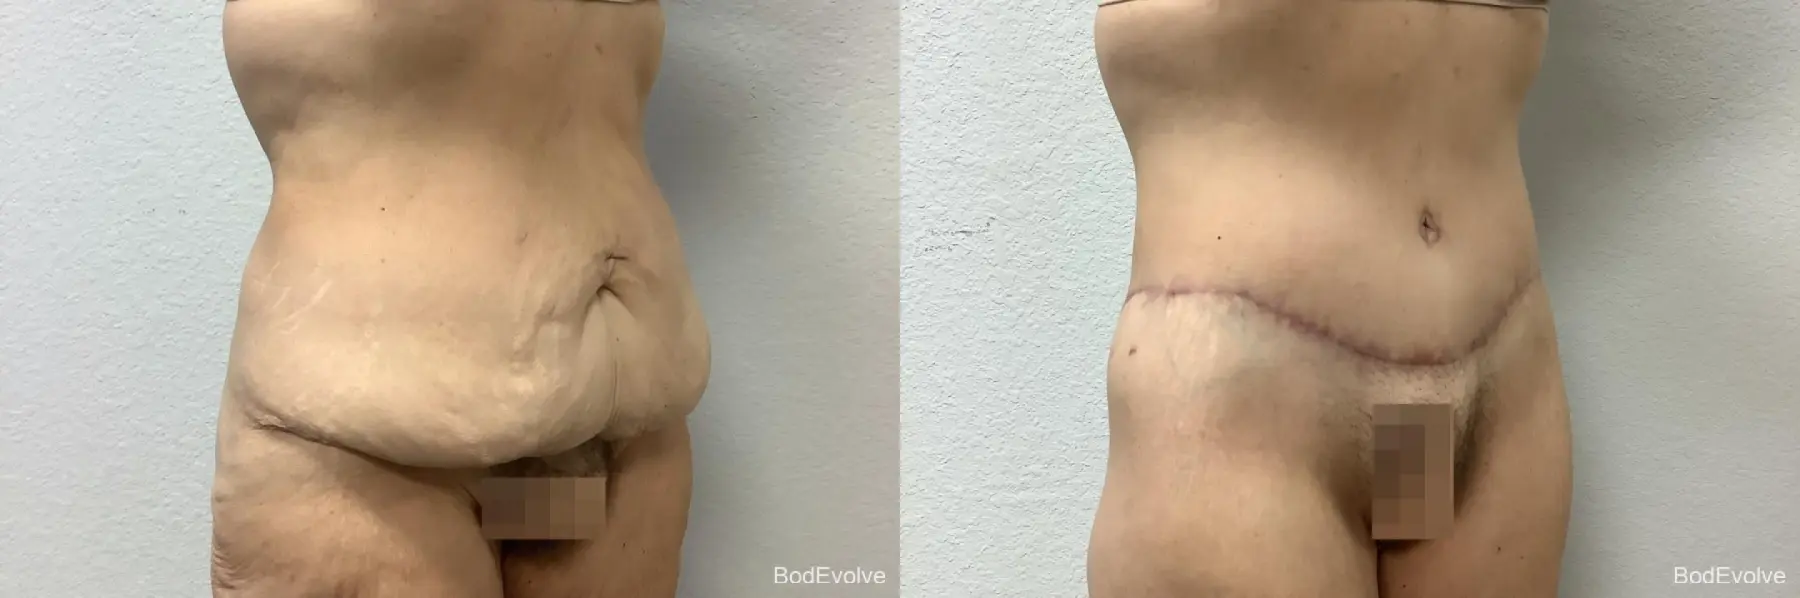 Body Lift: Patient 2 - Before and After 5